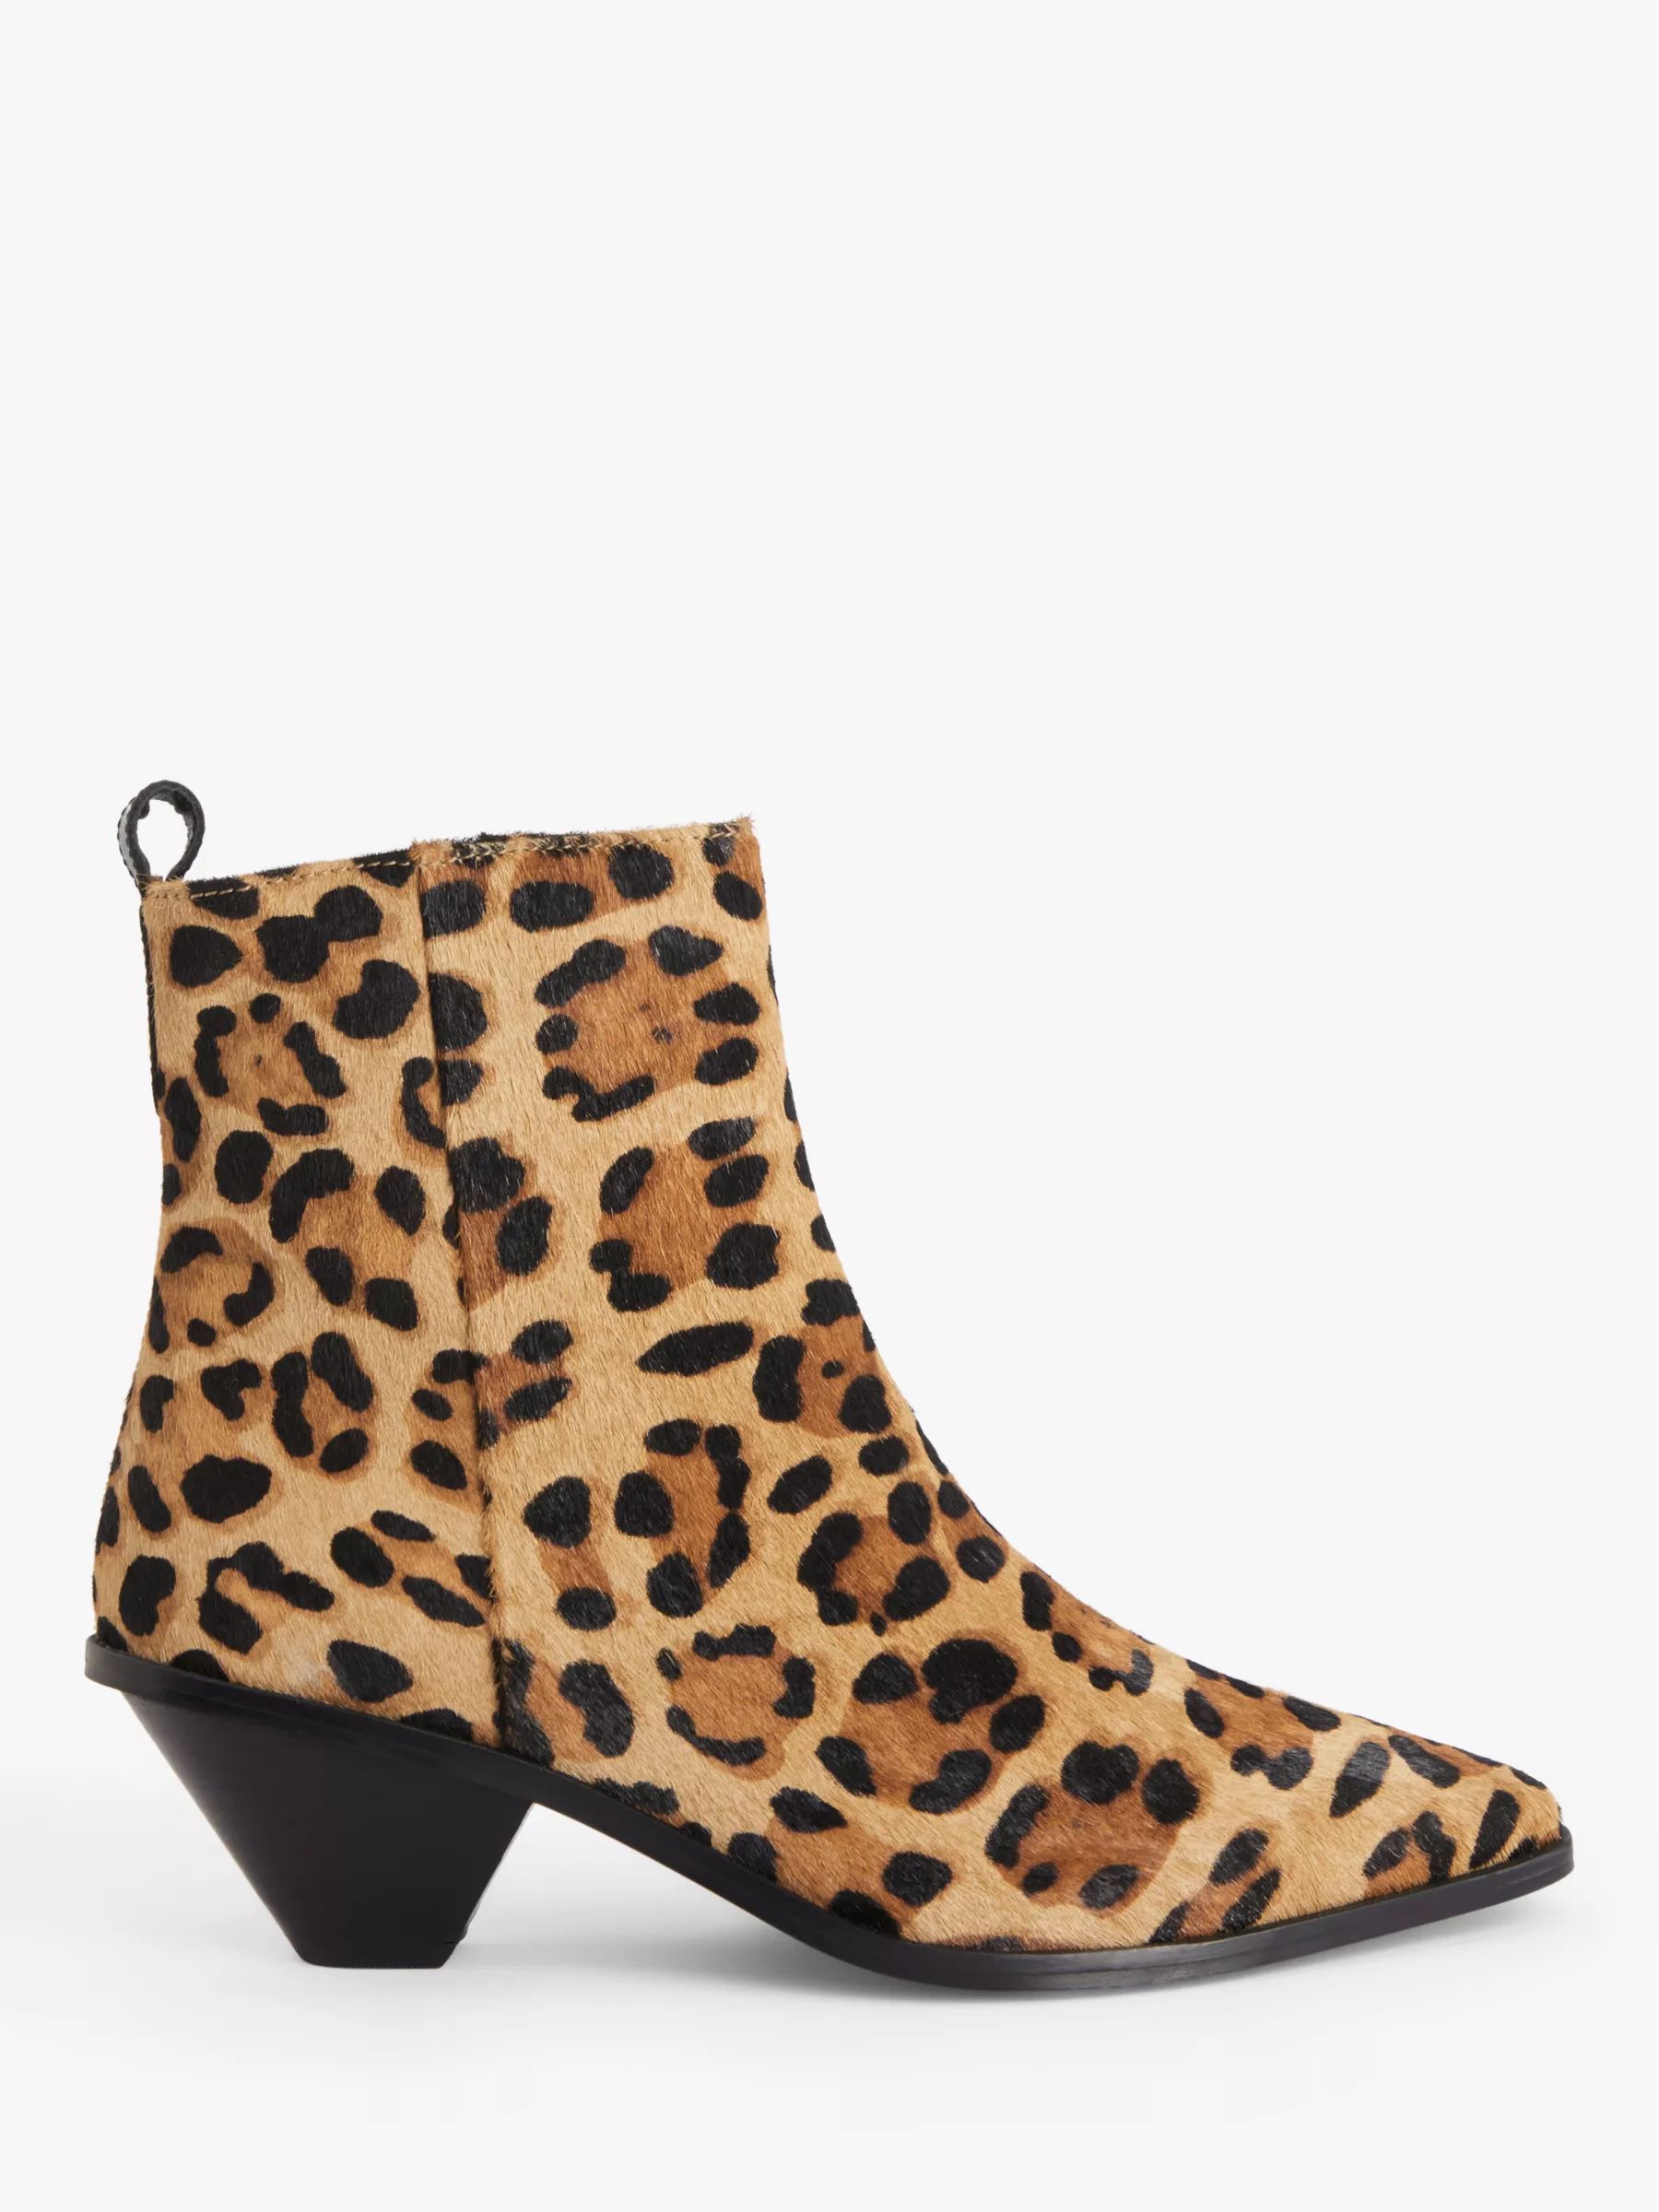 AND/OR Pascoe Leopard Print Leather Western Cone Heel Ankle Boots, Tan | John Lewis (UK)